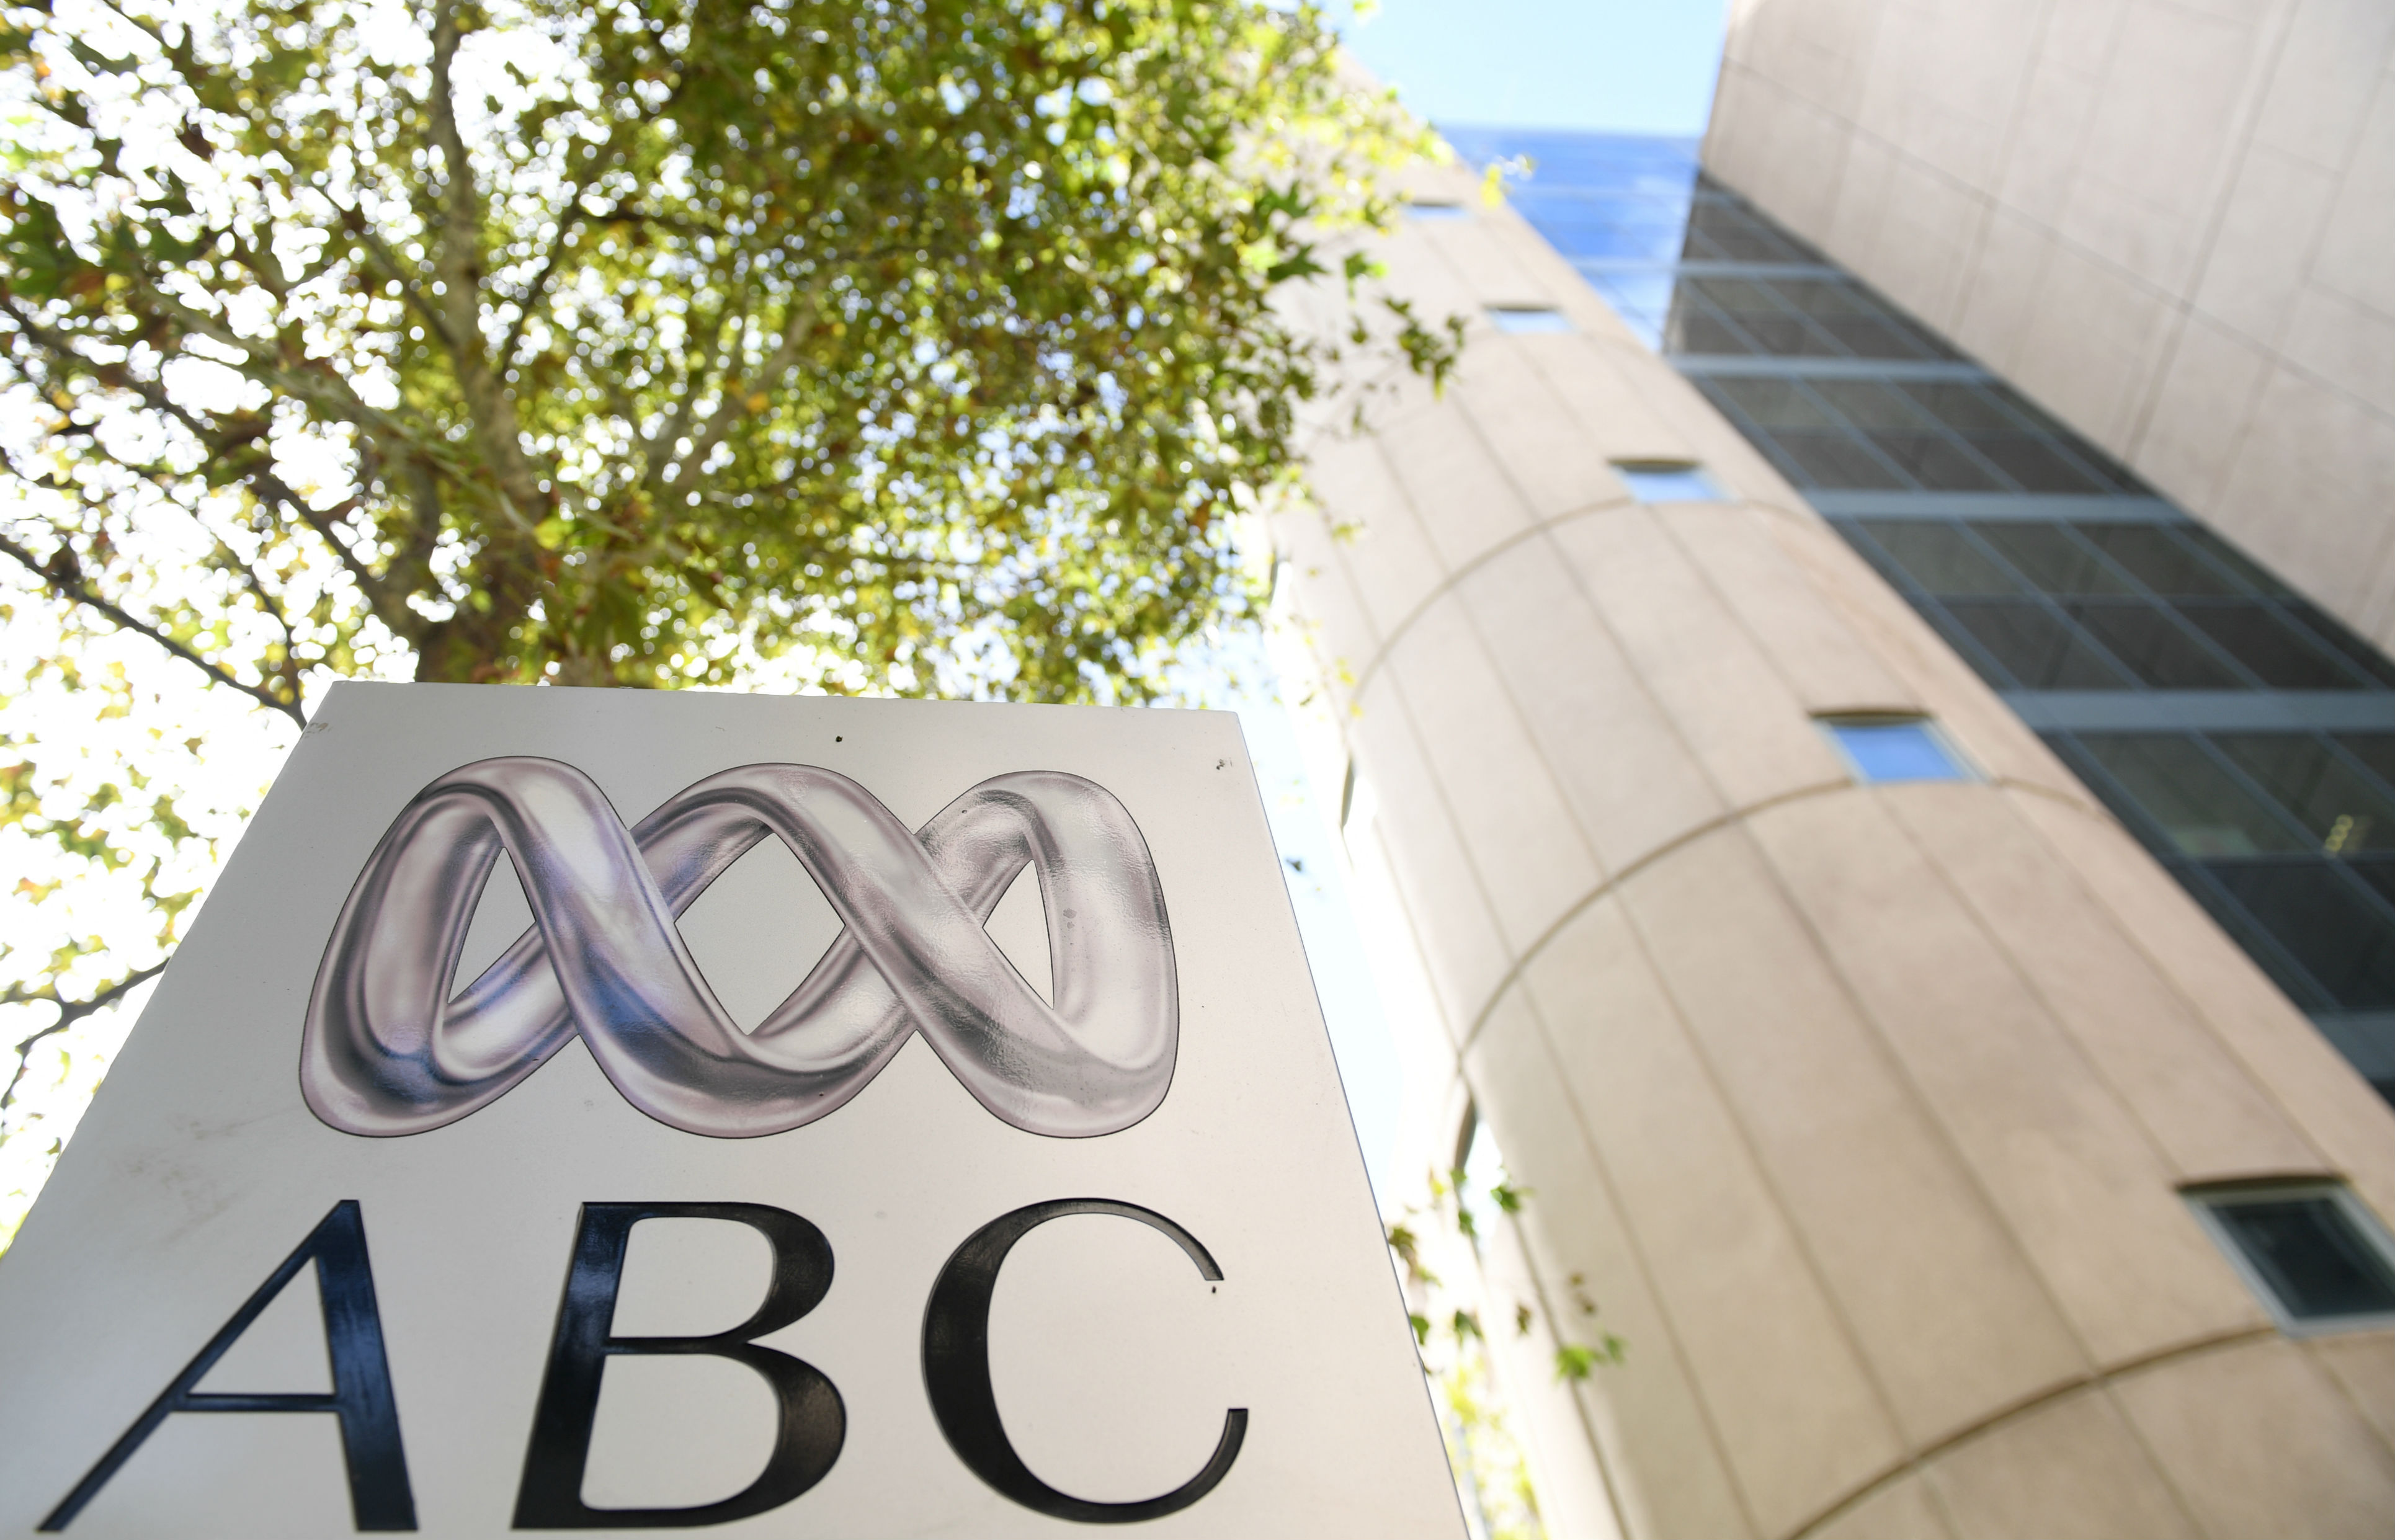 Australia's national broadcaster accused of producing 'antagonistic, one-sided narrative about the Catholic Church' 